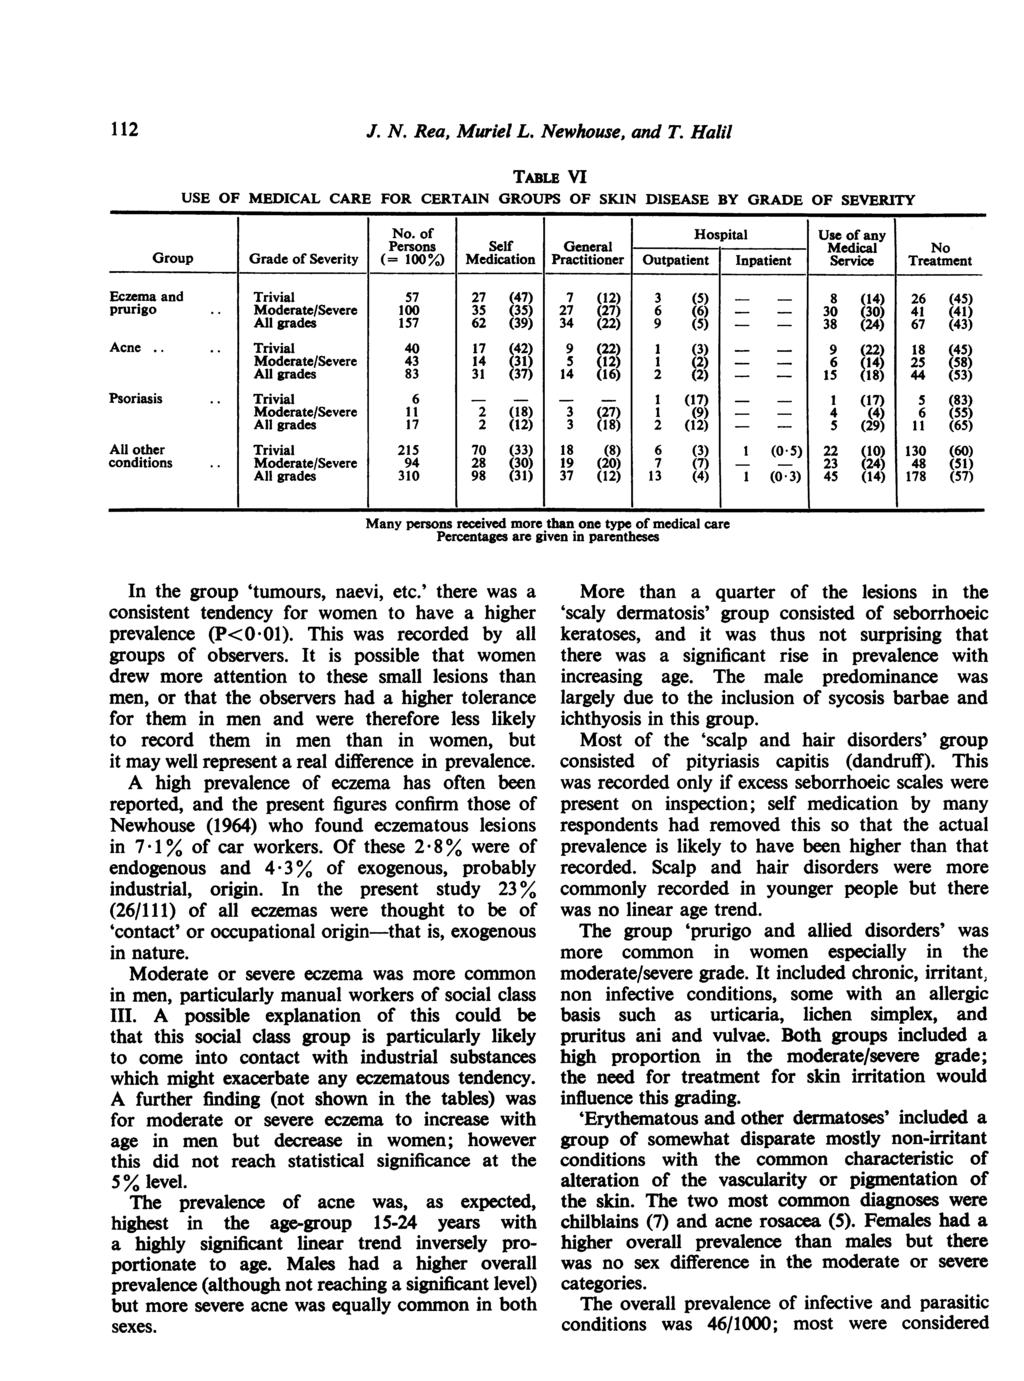 112 USE OF MEDICAL CARE J. N. Rea, Muriel L. Newhouse, and T. Halil TABLE VI FOR CERTAIN GROUPS OF SKIN DISEASE BY GRADE OF SEVERITY No.